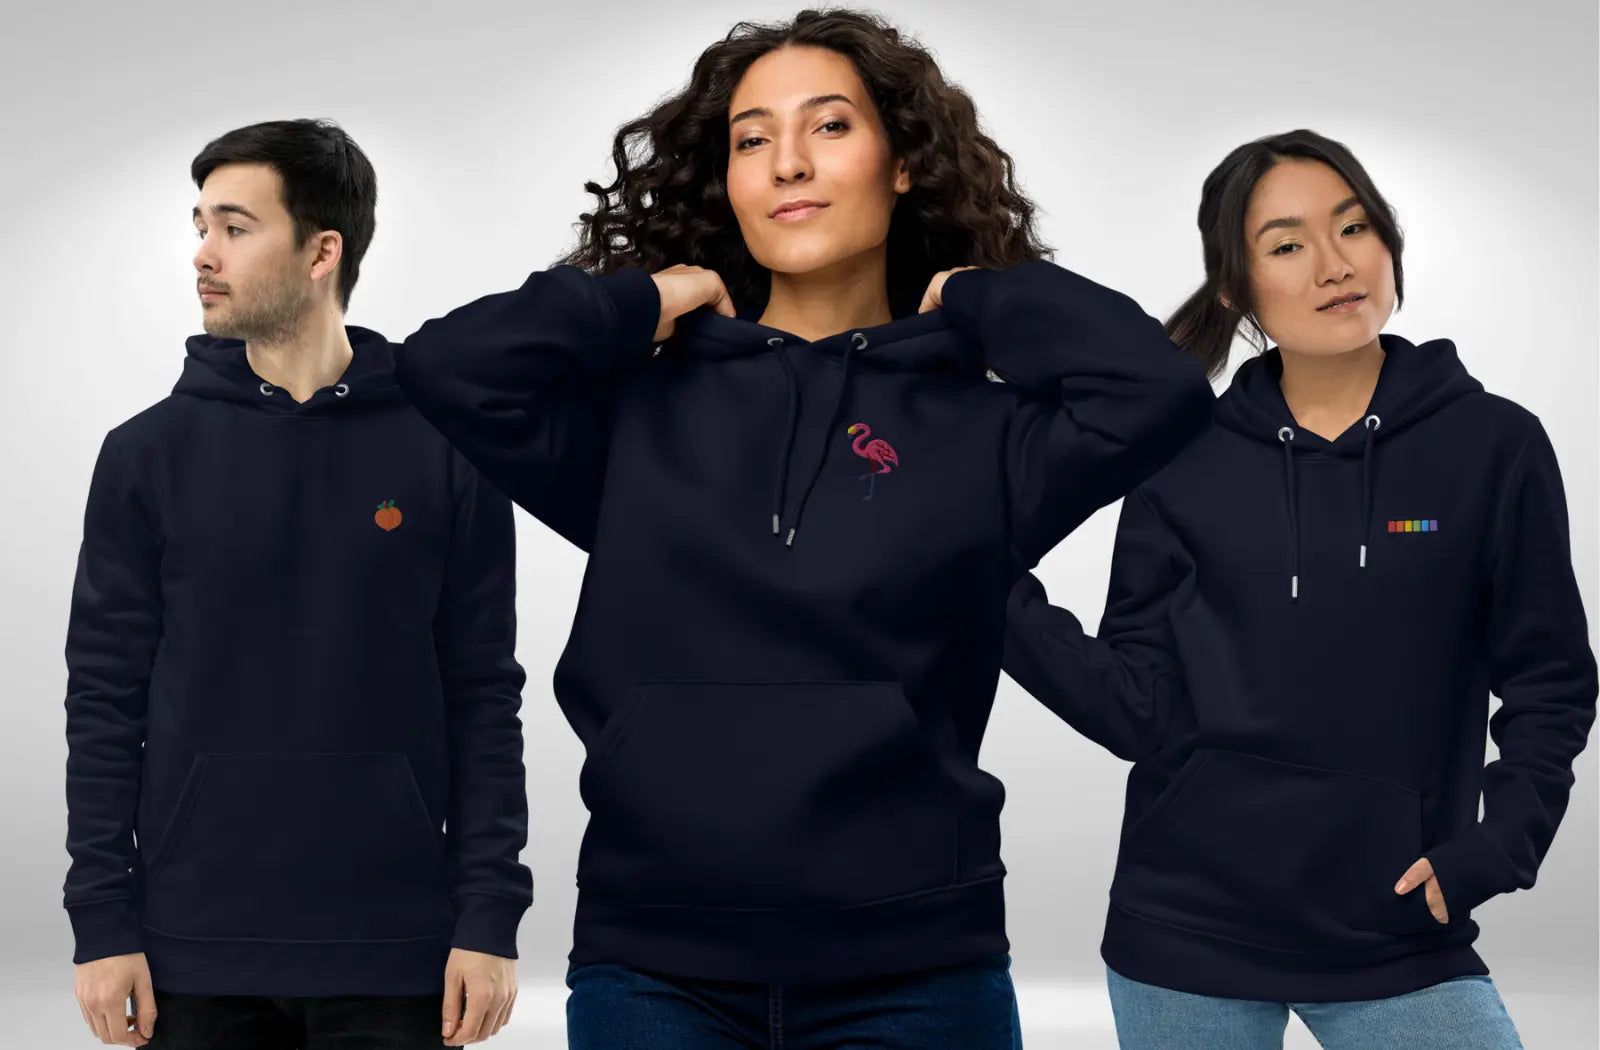 Three people wearing navy blue eco-friendly hoodies, each with subtle queer designs embroidered on the left chest